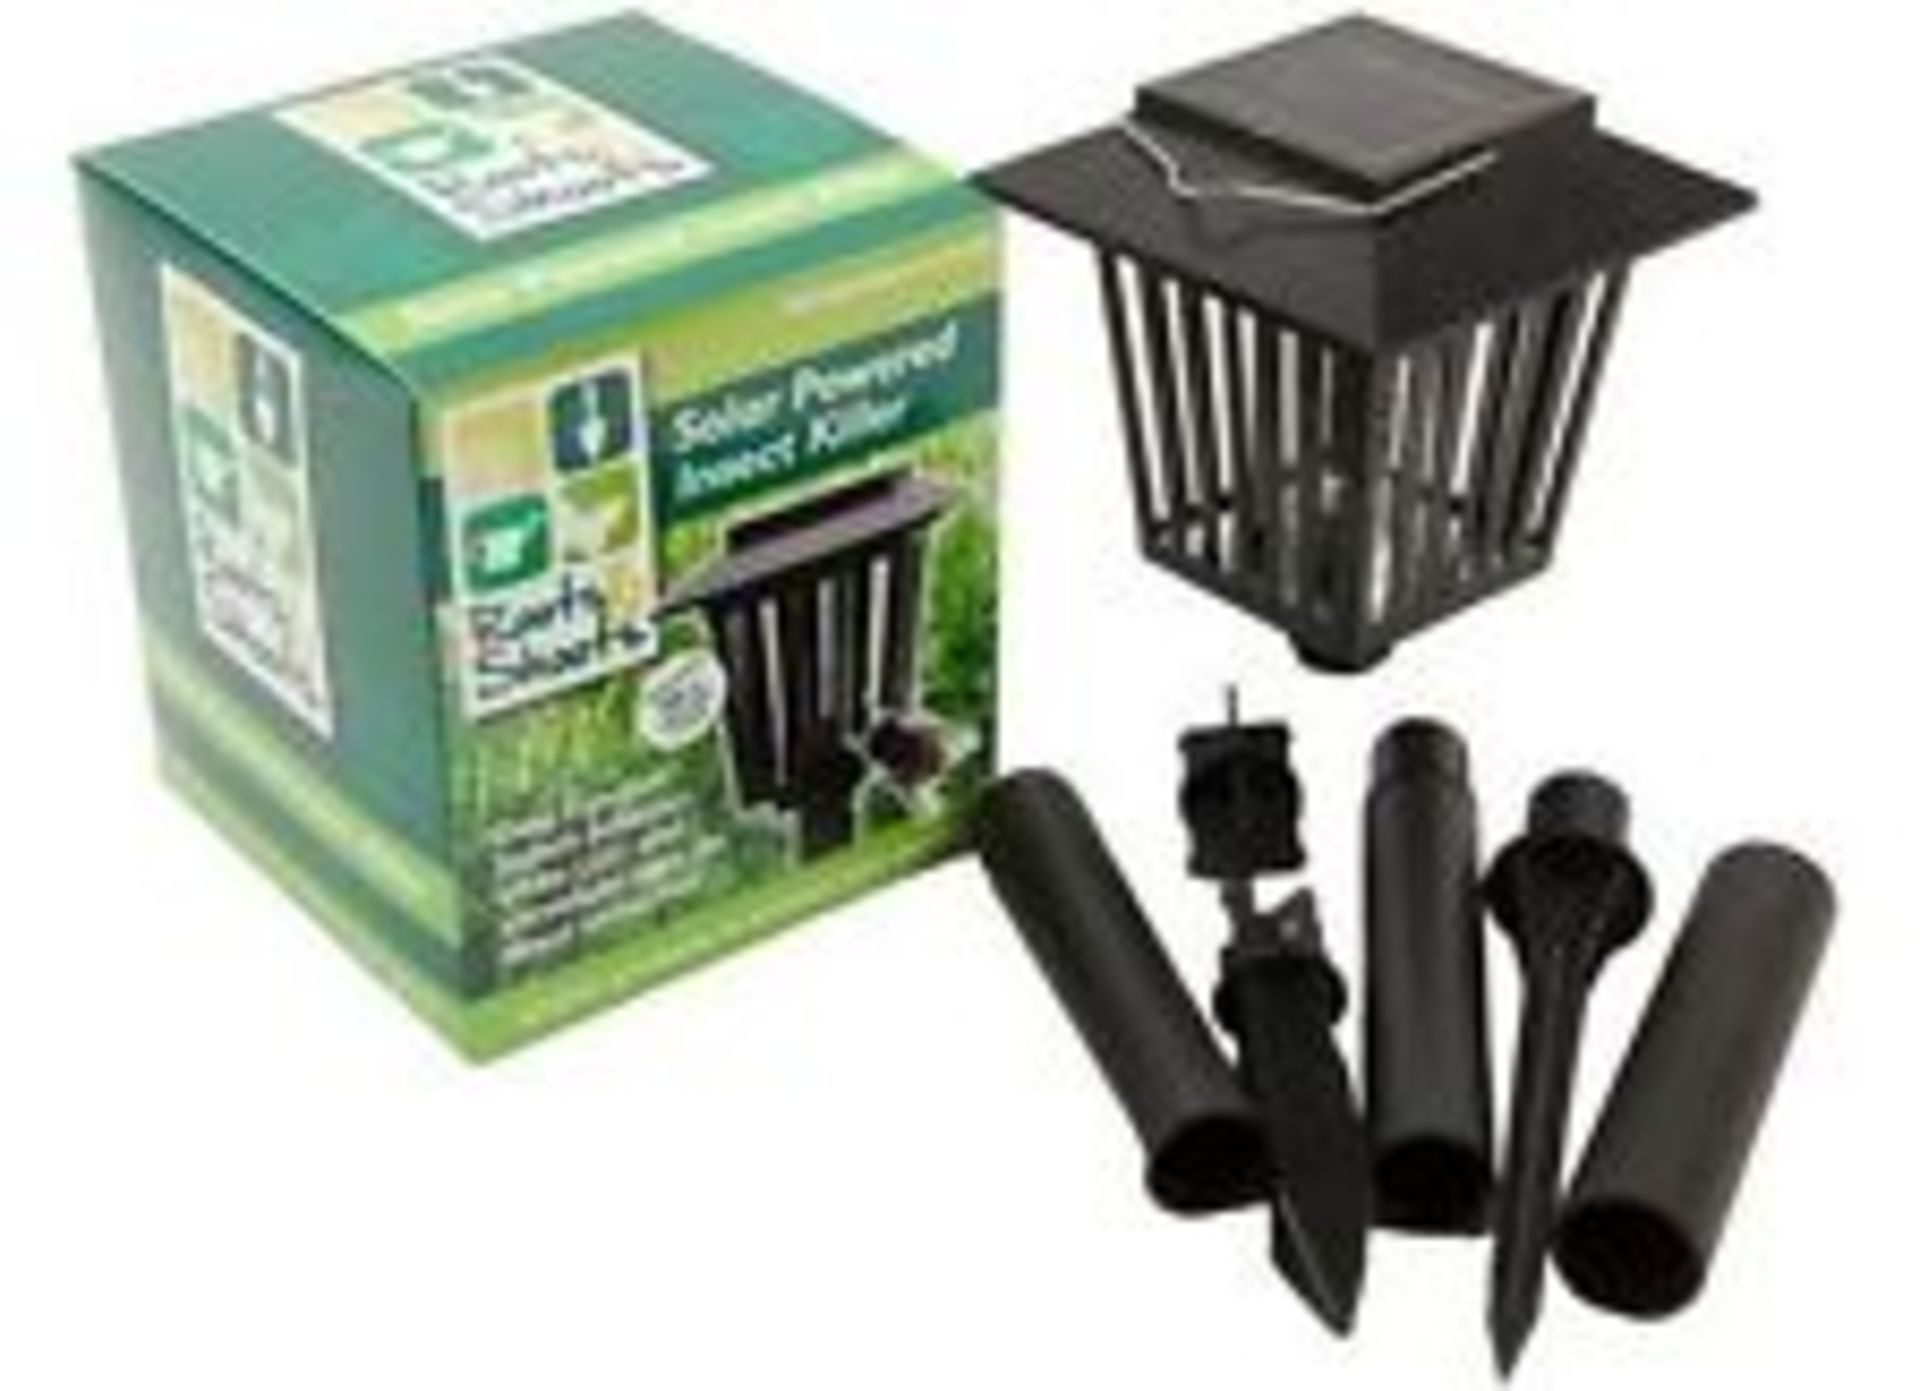 V Grade A 6" Diameter High Powered Lantern Insect Killer X 2 Bid price to be multiplied by Two